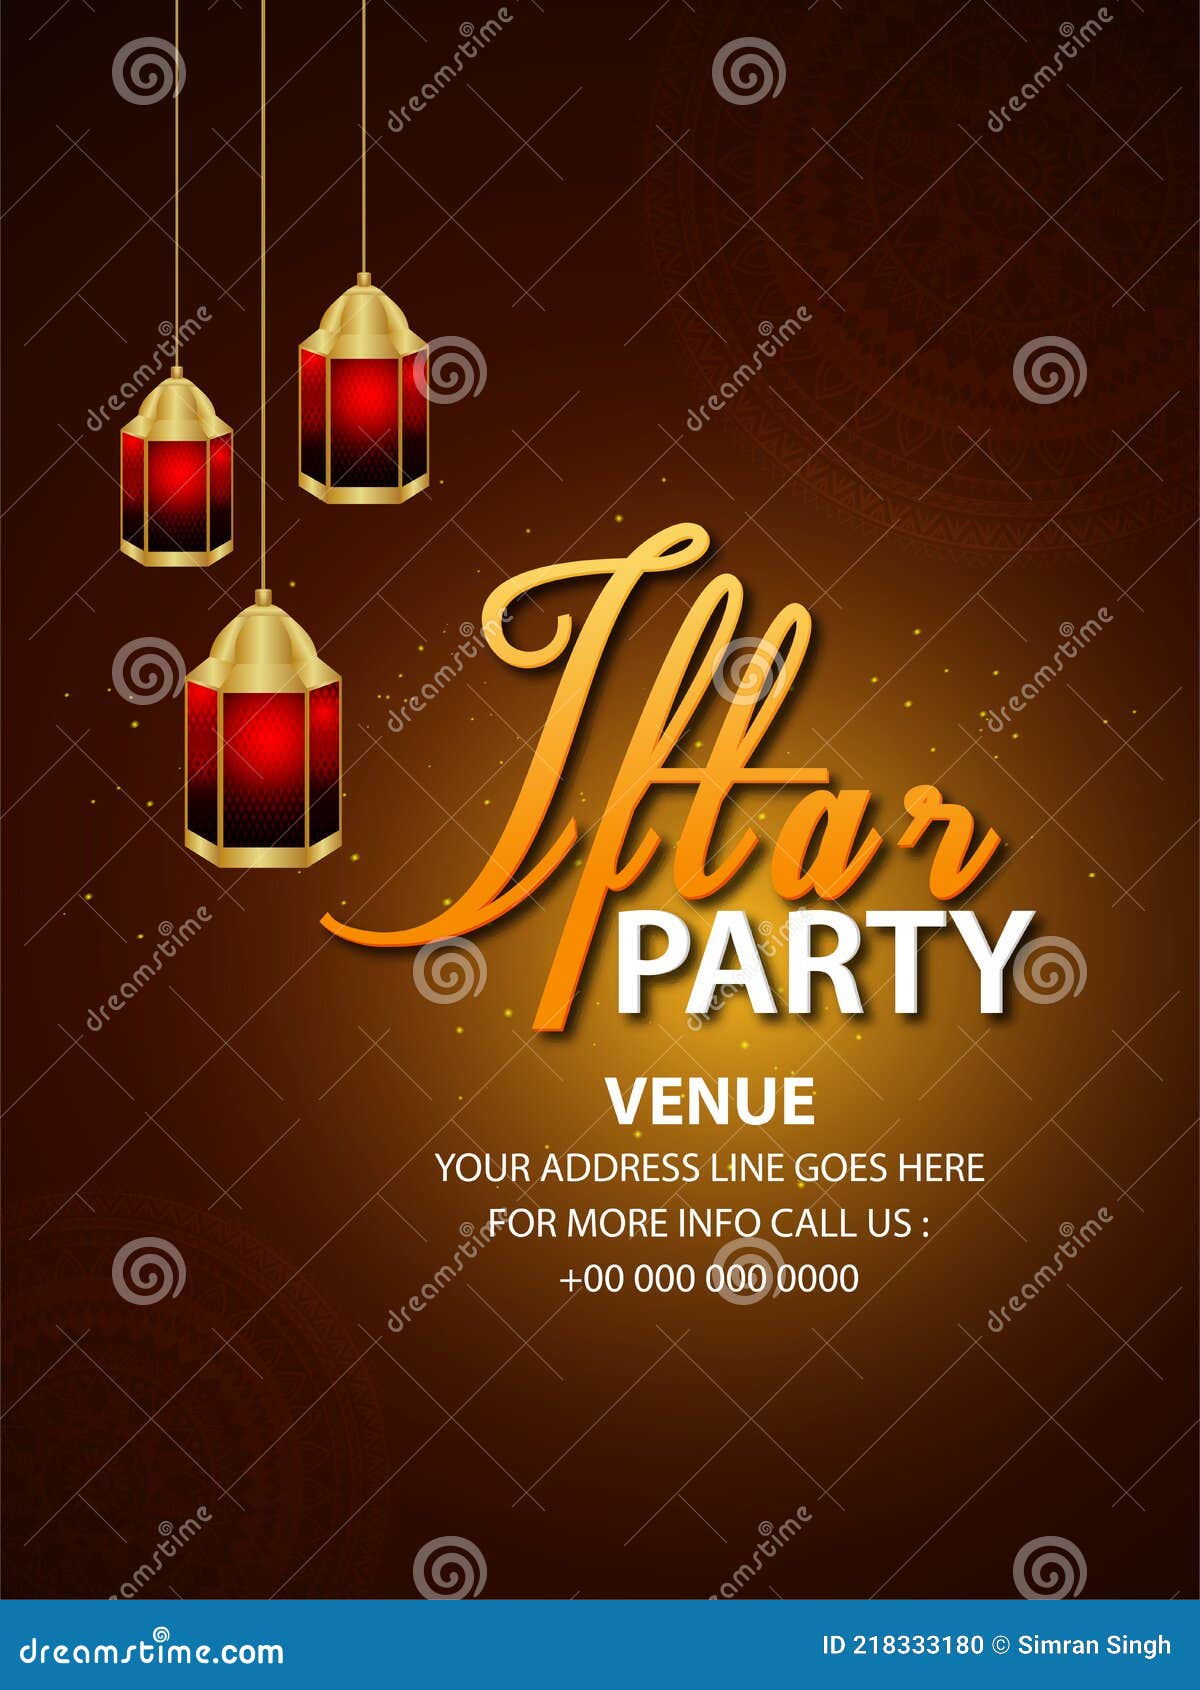 Iftar Party Invitation Poster or Flyer, Iftar Party Islamic Festival  Background Stock Illustration - Illustration of pattern, luxury: 218333180